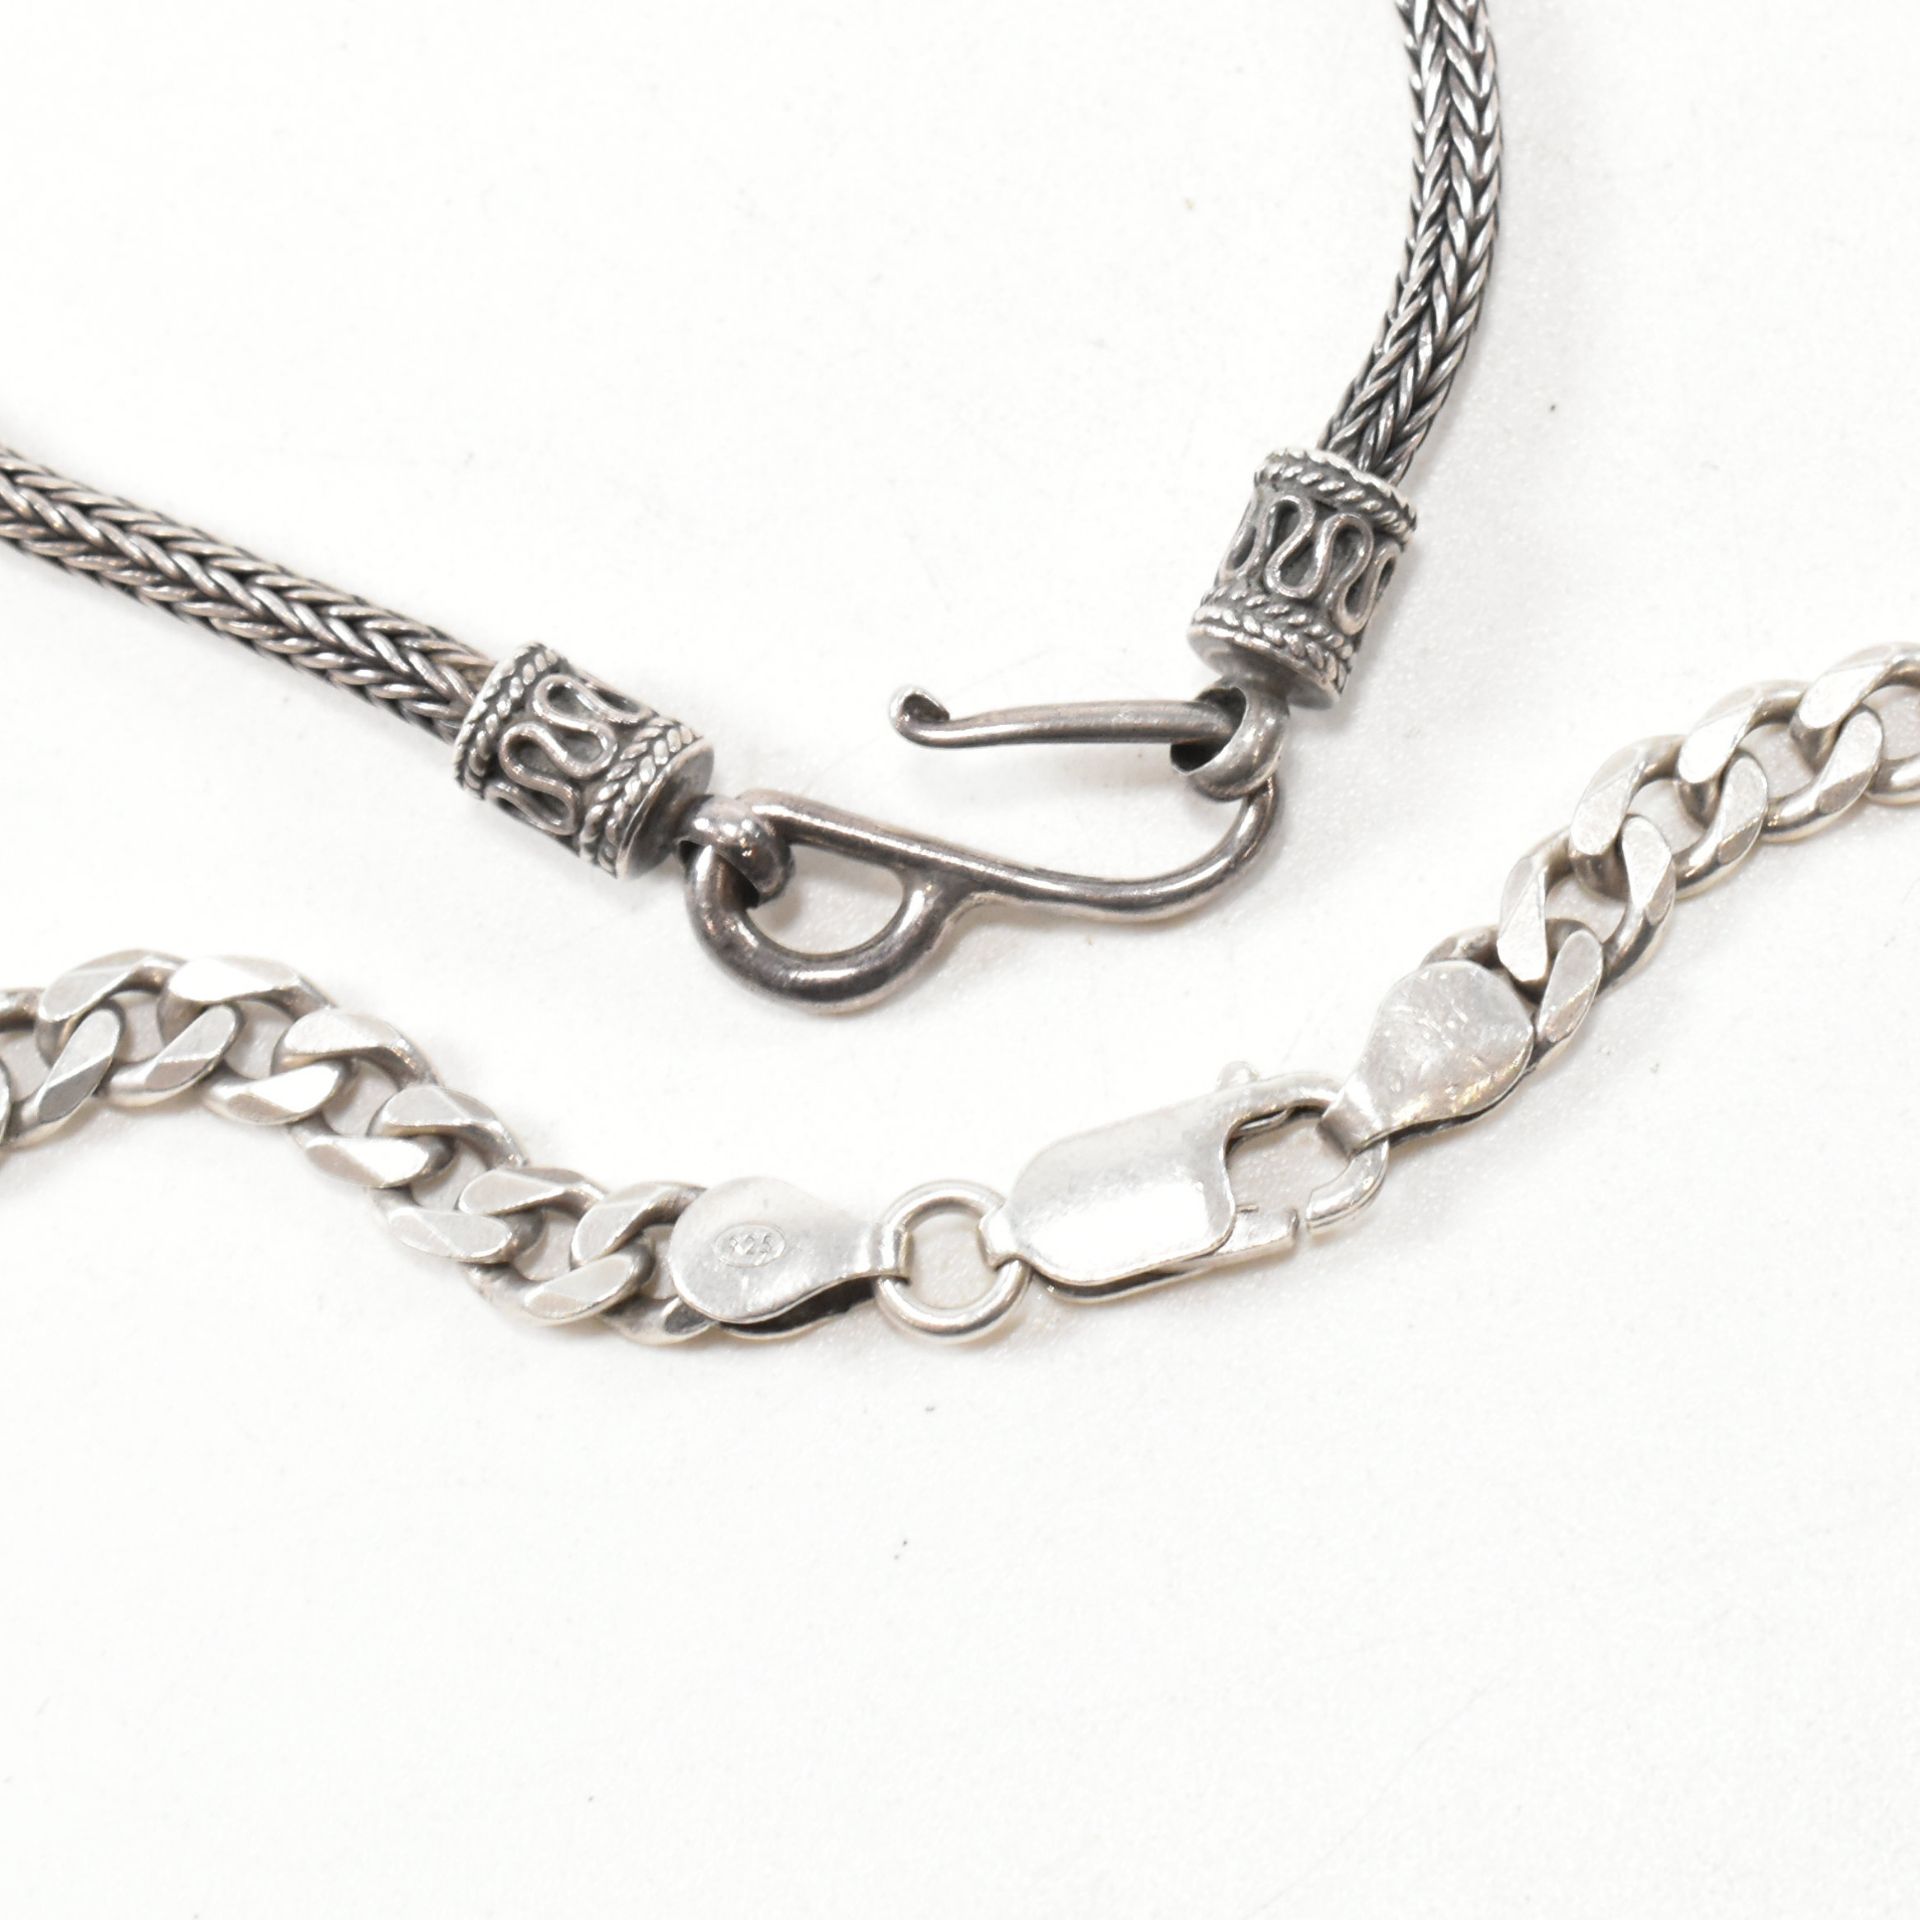 TWO 925 SILVER CHAIN NECKLACES - Image 4 of 4